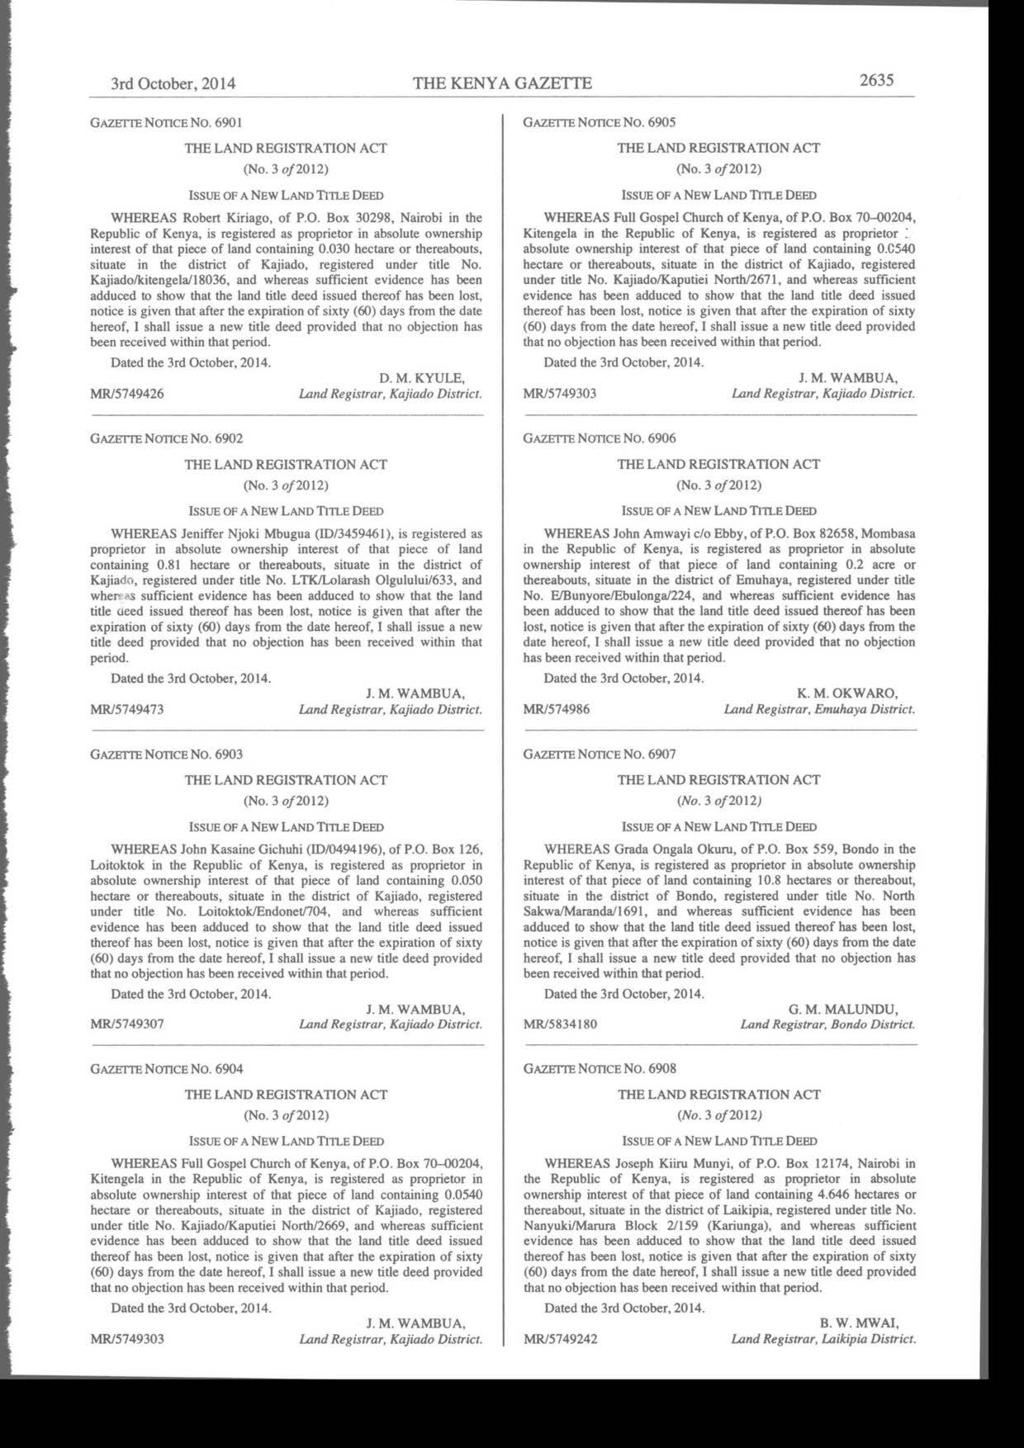 3rd October,2014 THE KENYA GAZETTE 2635 GAzE-rrE NorrcE No. 690I (No. 3 o/2012) ISSUE of A NEw LAND TITLE DEED WHEREAS Robert Kiriago, of P.O. Box 30298, Nairobi in the Republic of Kenya, is registered as proprietor in absolute ownership interest of that piece of land containing 0.